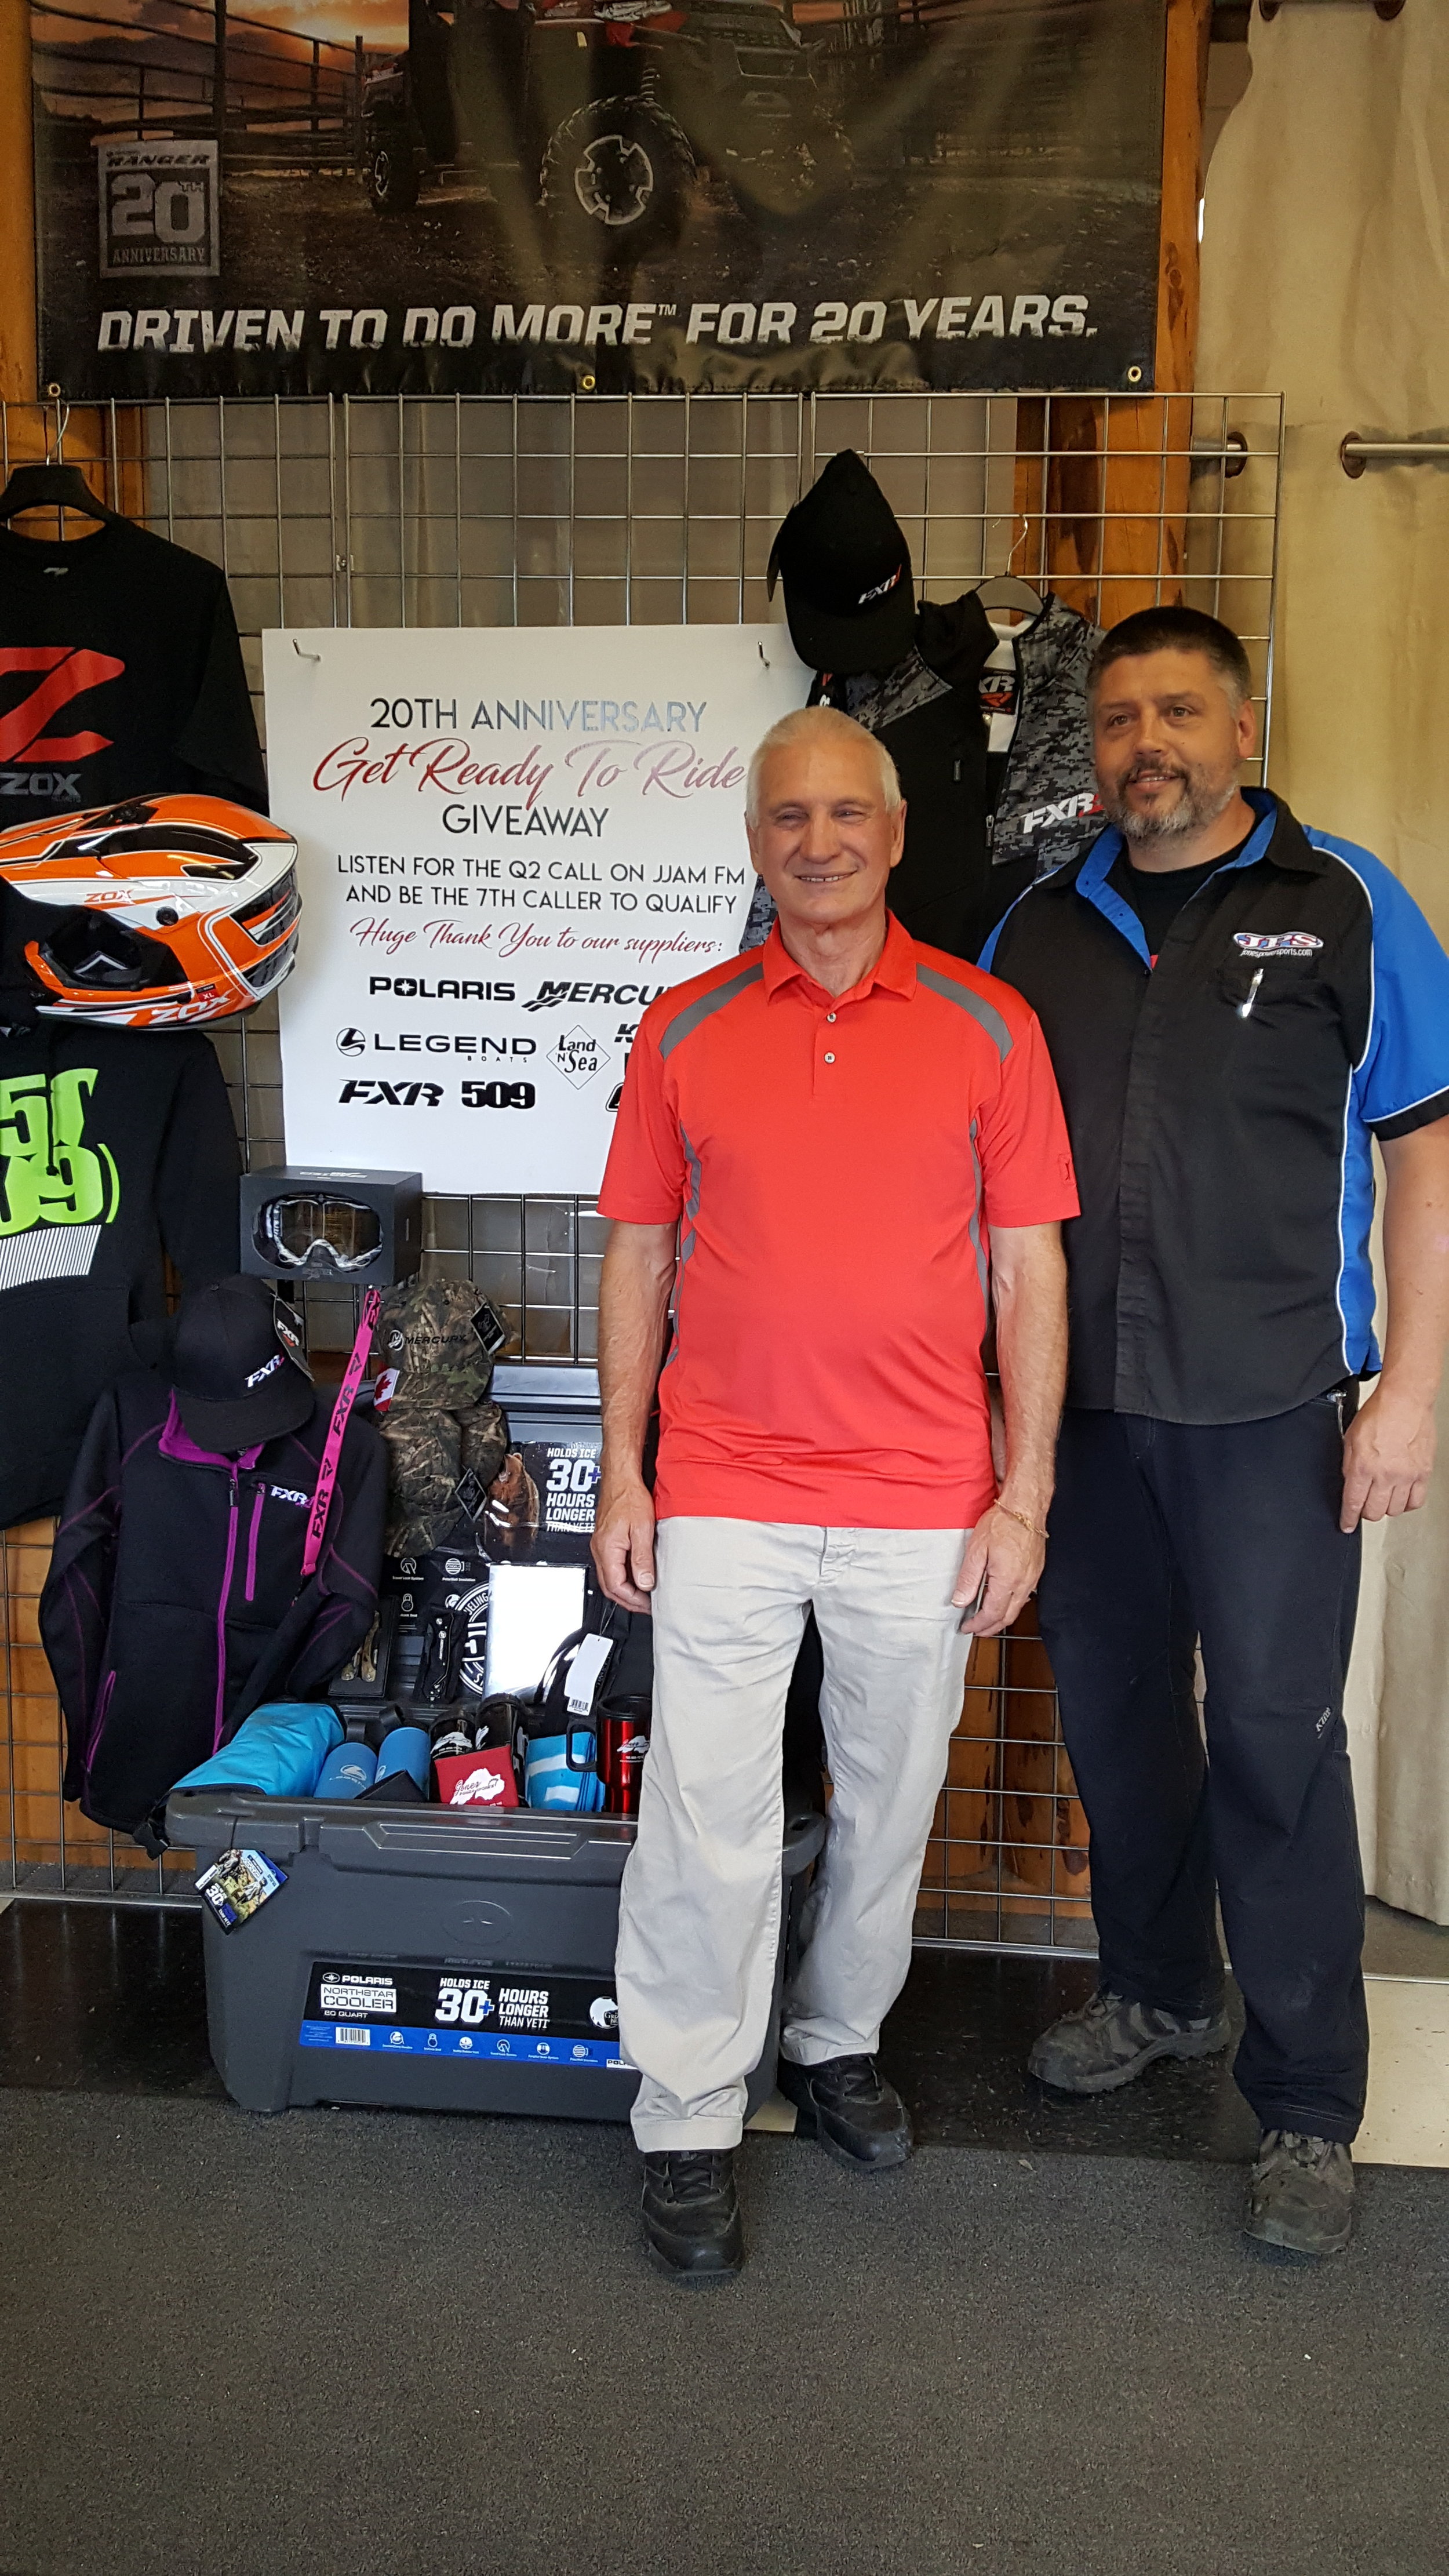 Aug 31 2018-Biggest Giveaway of the summer with Jones Power Sports Prize Pack